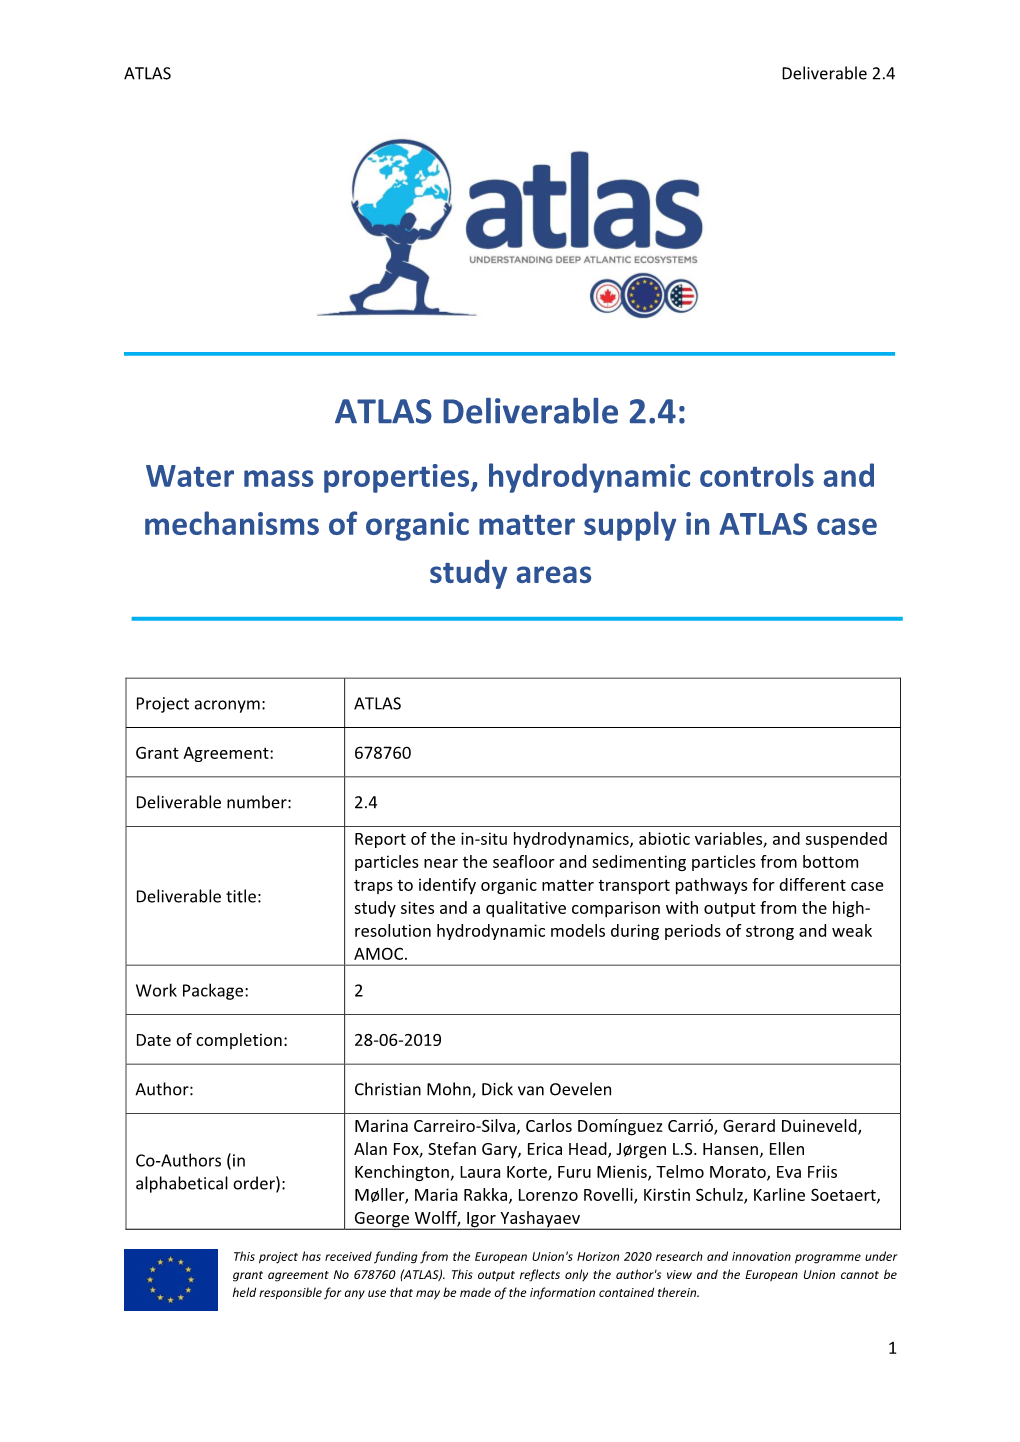 ATLAS Deliverable 2.4: Water Mass Properties, Hydrodynamic Controls and Mechanisms of Organic Matter Supply in ATLAS Case Study Areas